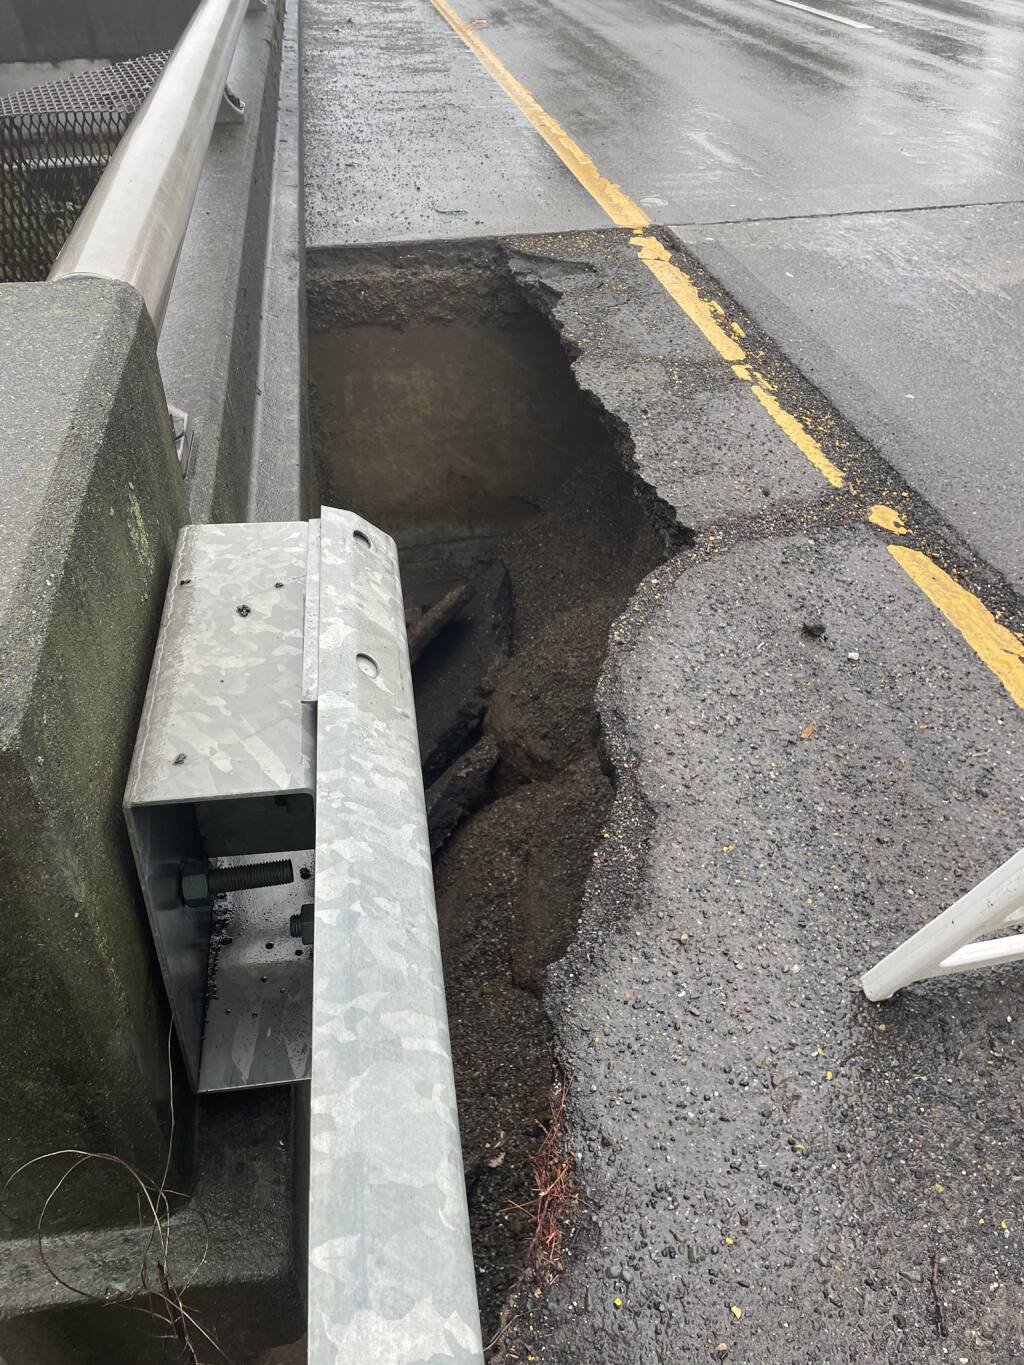 This image shows a sinkhole discovered Friday, Dec. 30, 2022 on westbound Highway 12 at Dutton Avenue in Santa Rosa. Traffic was expected to be reduced to one lane overnight. (California Highway Patrol)